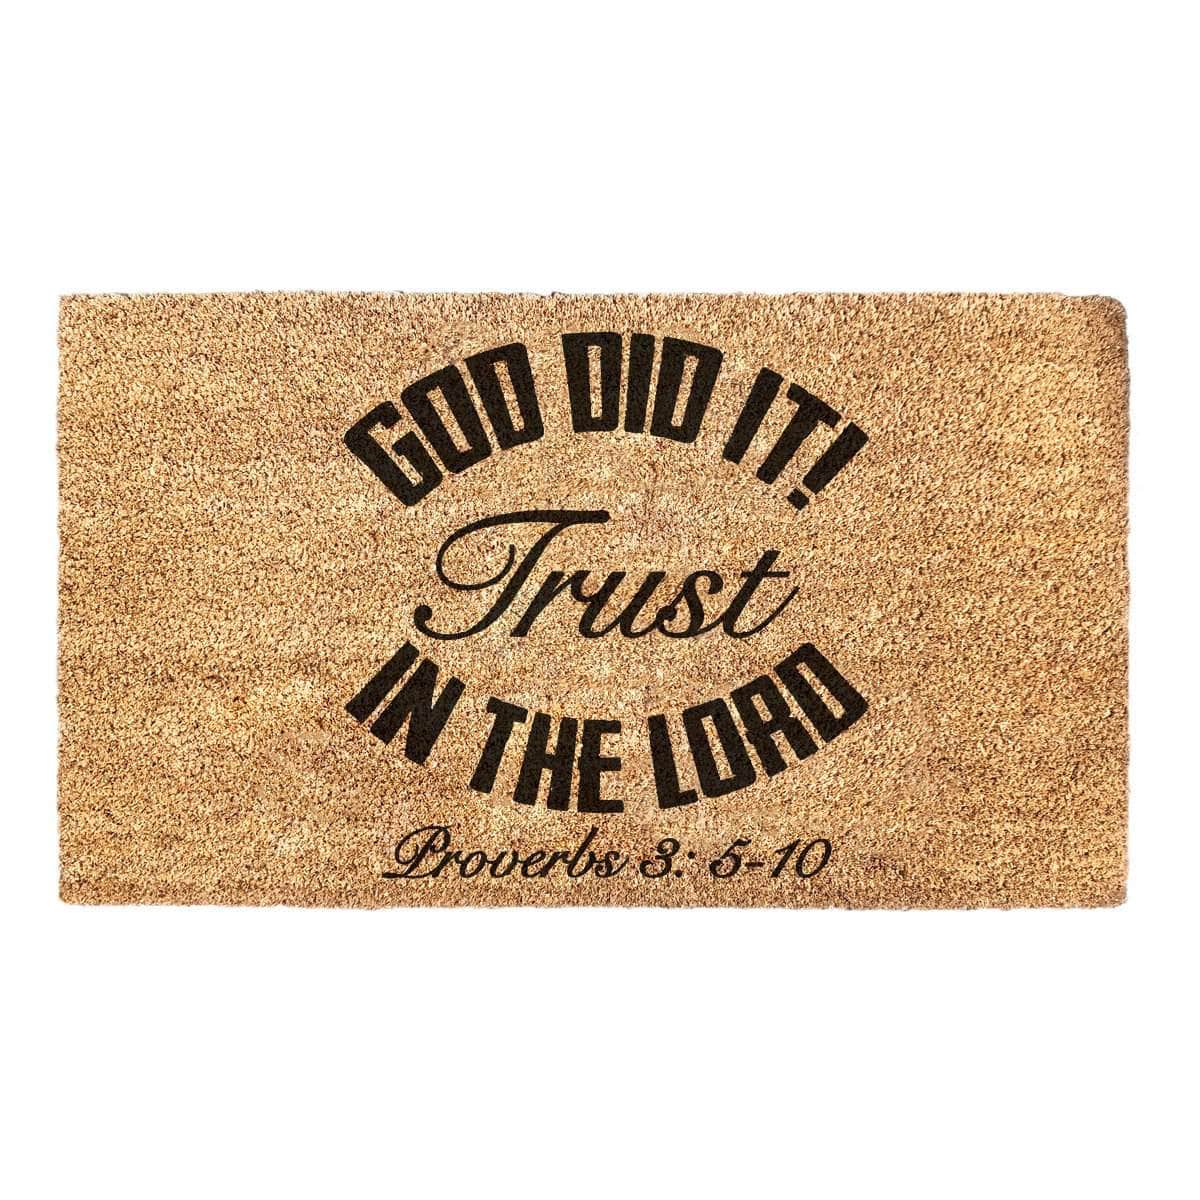 God Did It! Trust In The Lord Proverbs 3: 5-10 - Christian Doormat